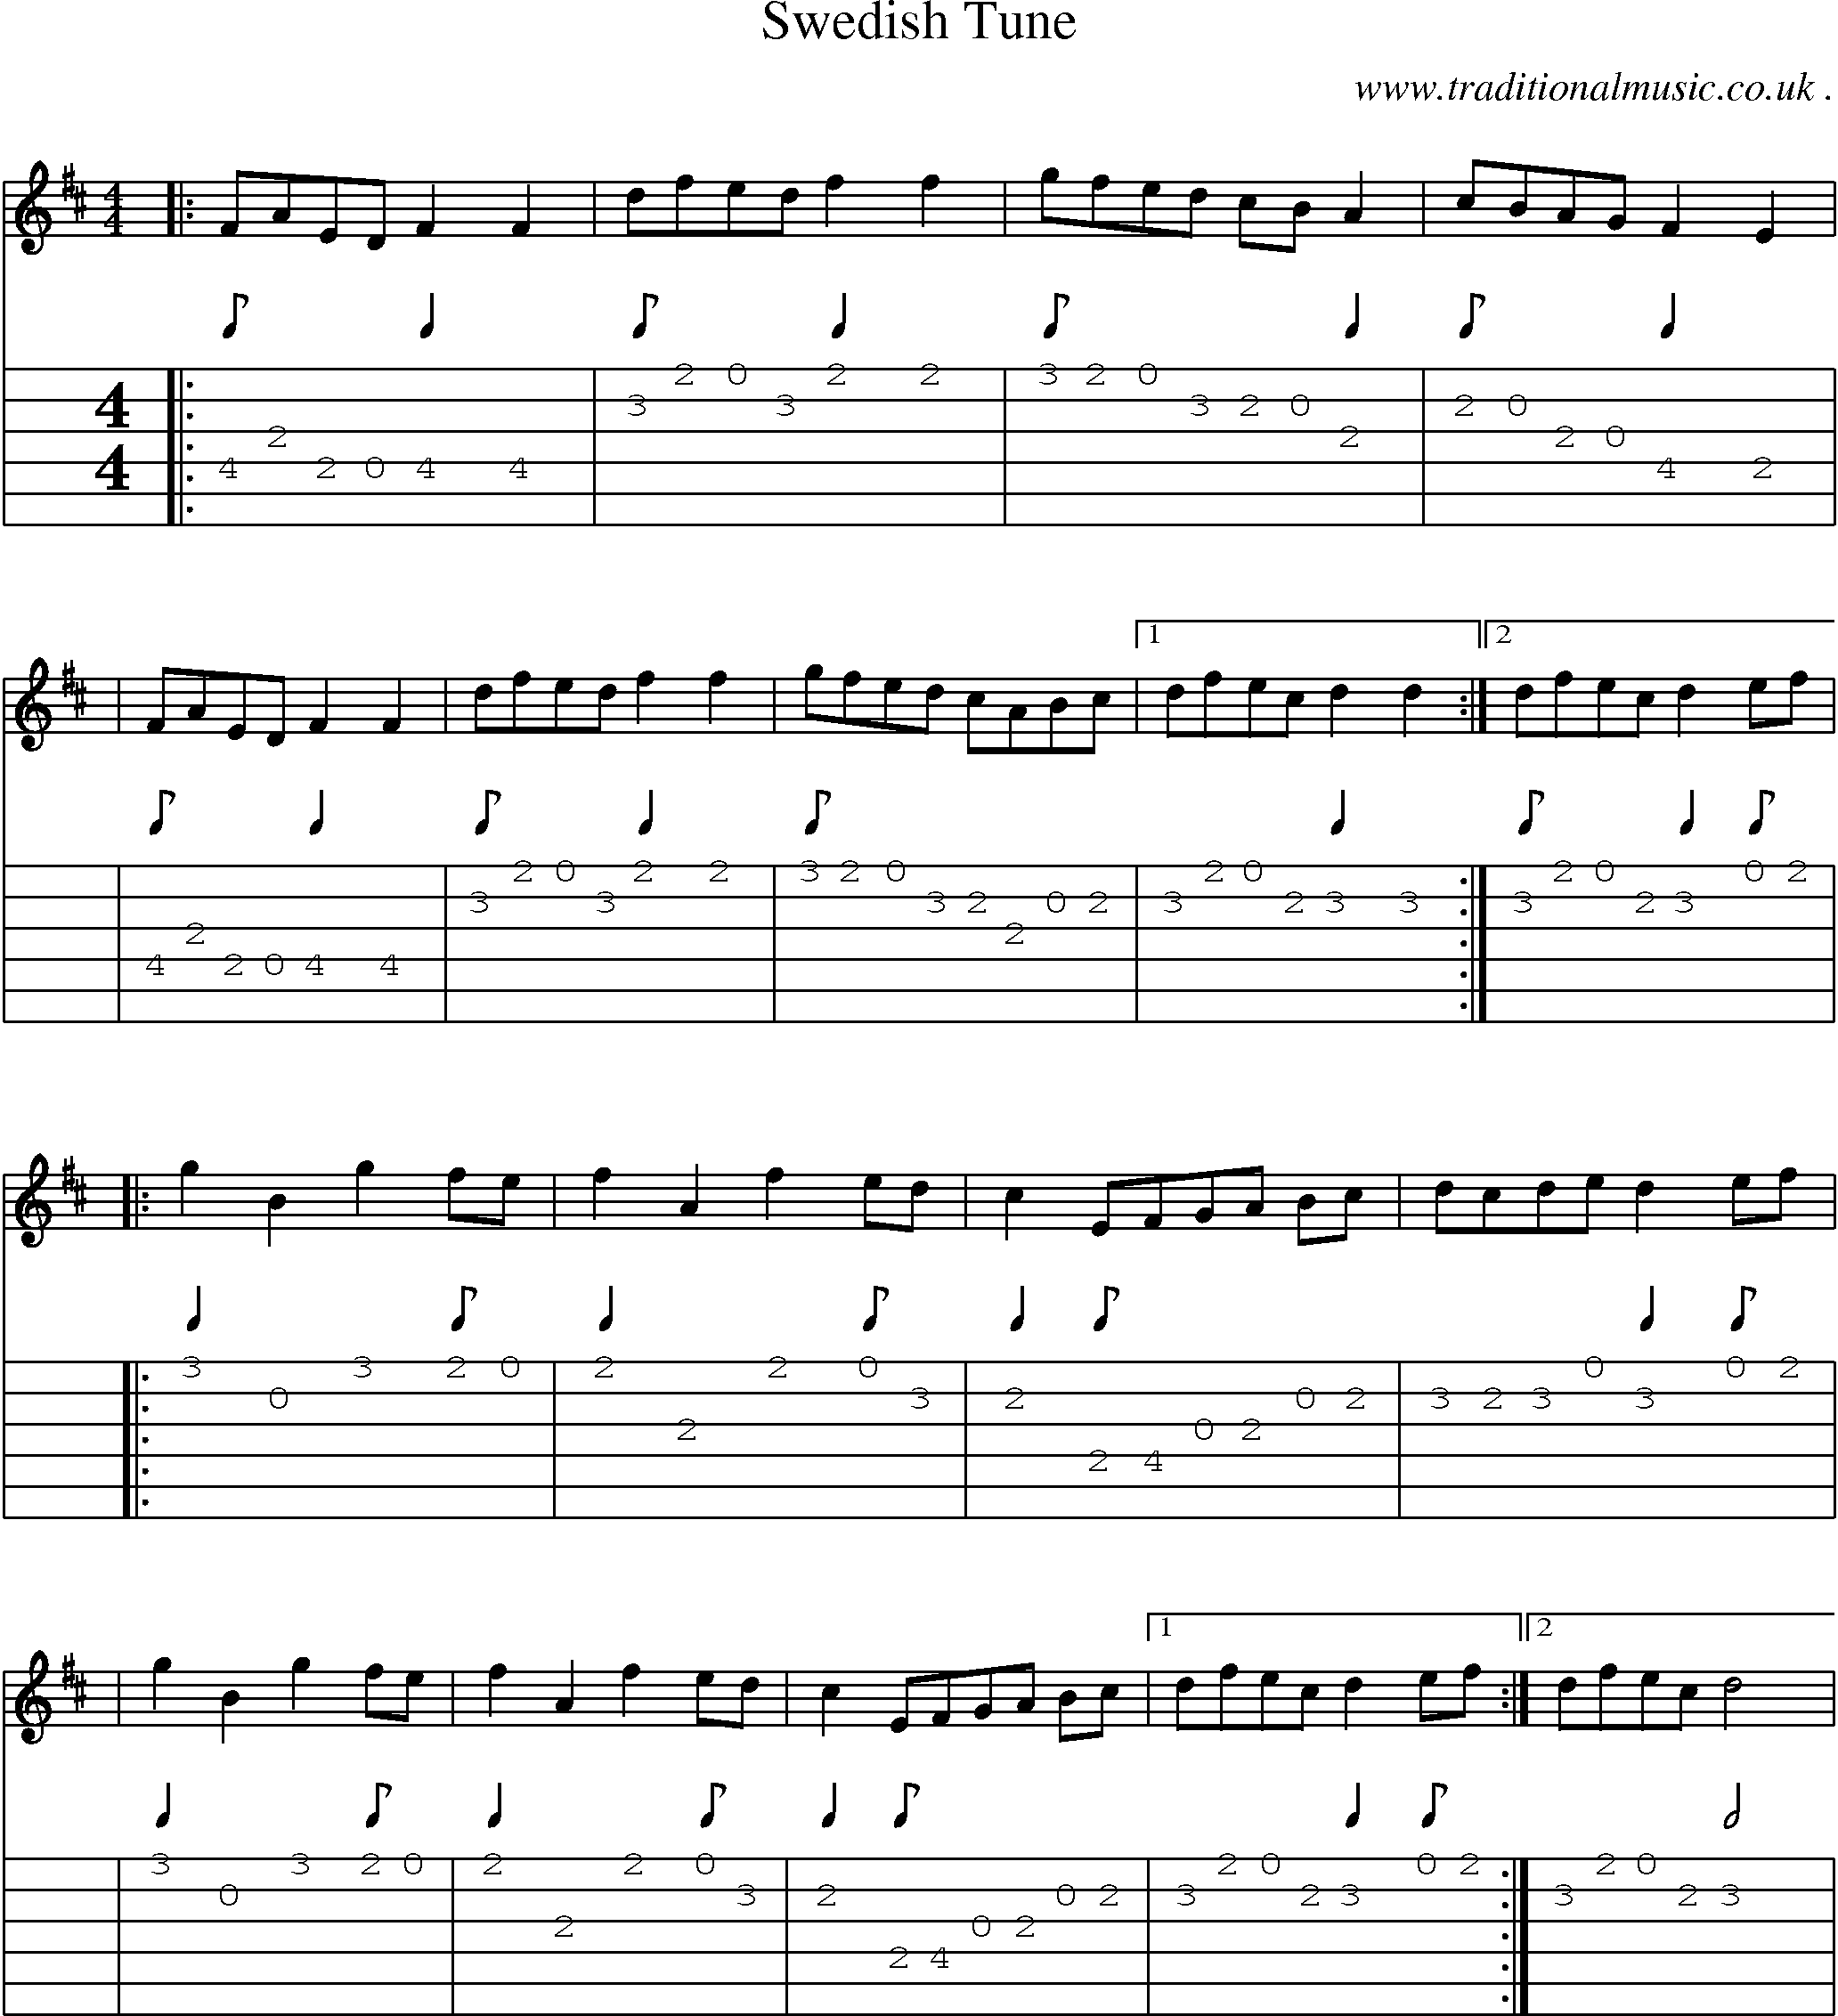 Sheet-Music and Guitar Tabs for Swedish Tune